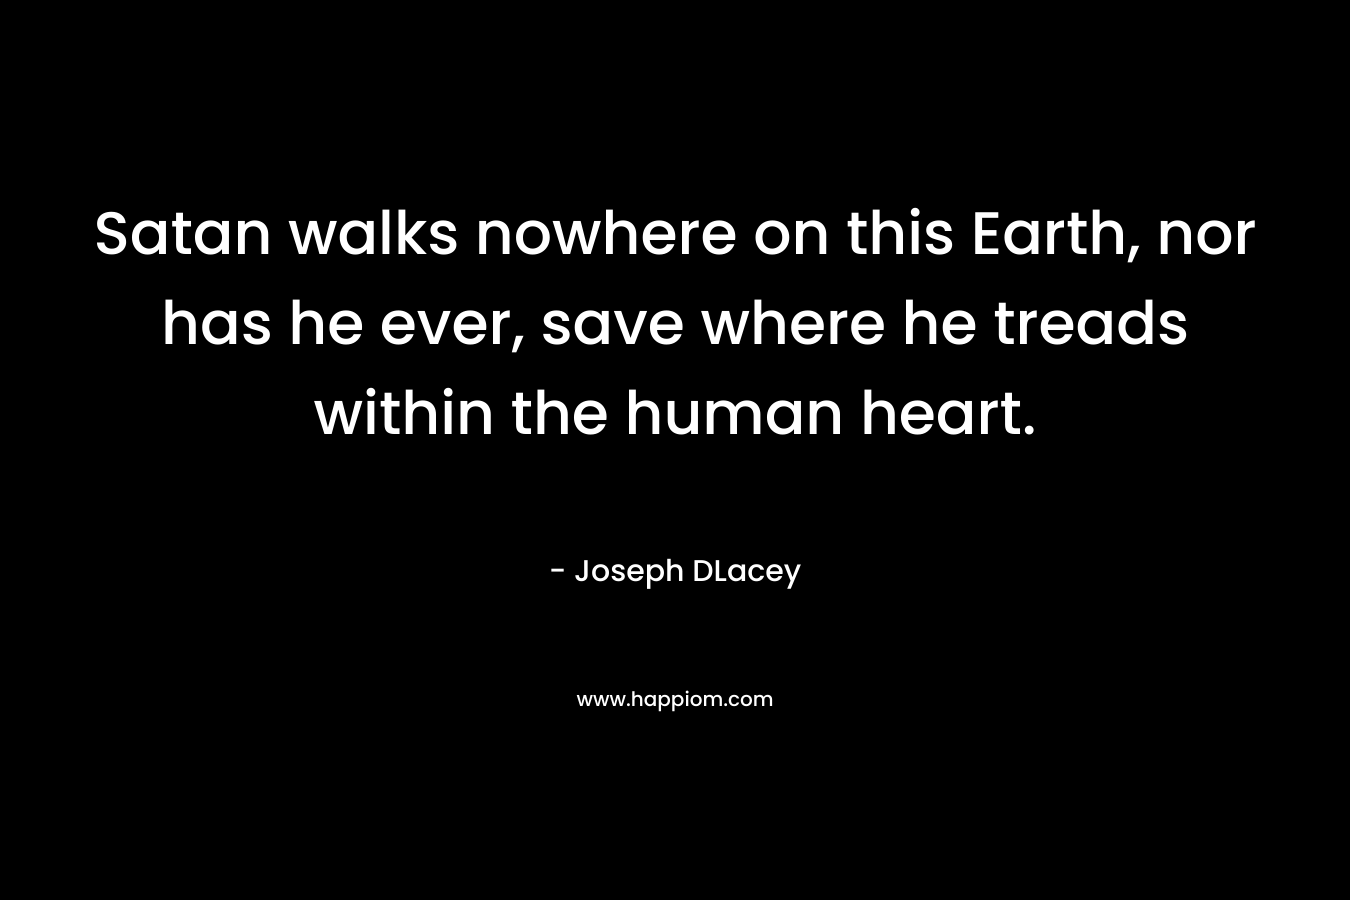 Satan walks nowhere on this Earth, nor has he ever, save where he treads within the human heart. – Joseph DLacey